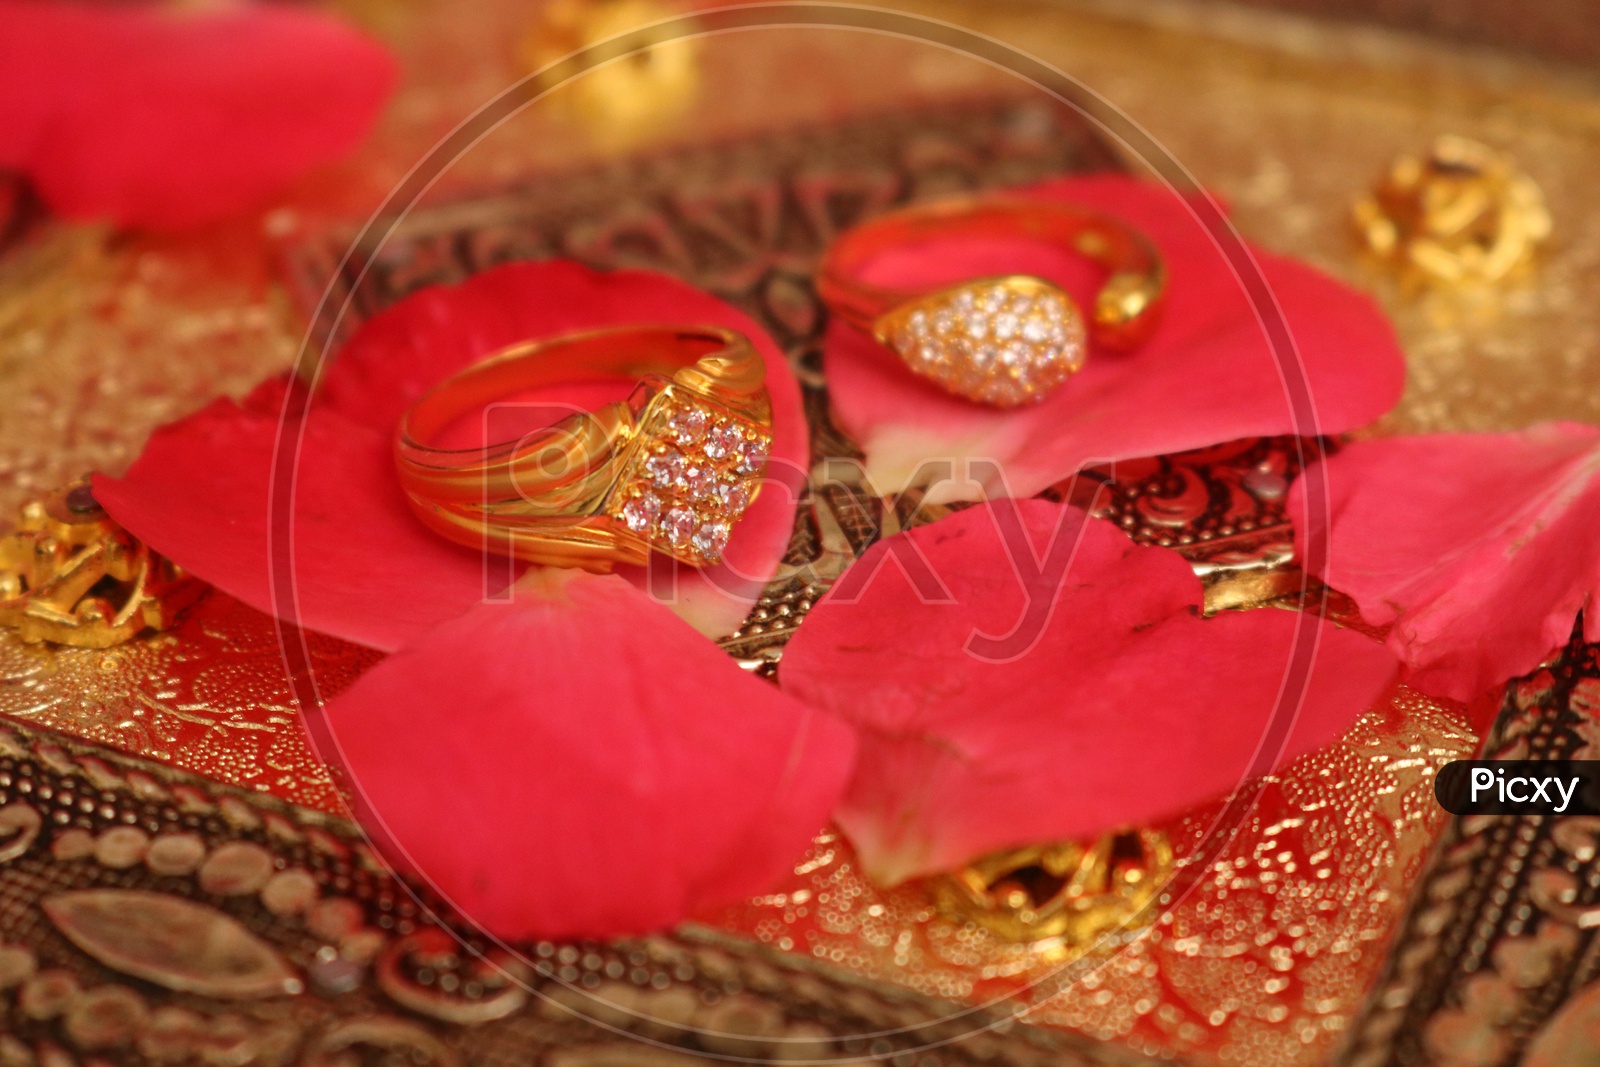 An Indian Bride and Groom Their Shows Engagement Rings during a Hindu  Wedding Ritual Stock Image - Image of indian, family: 166676575